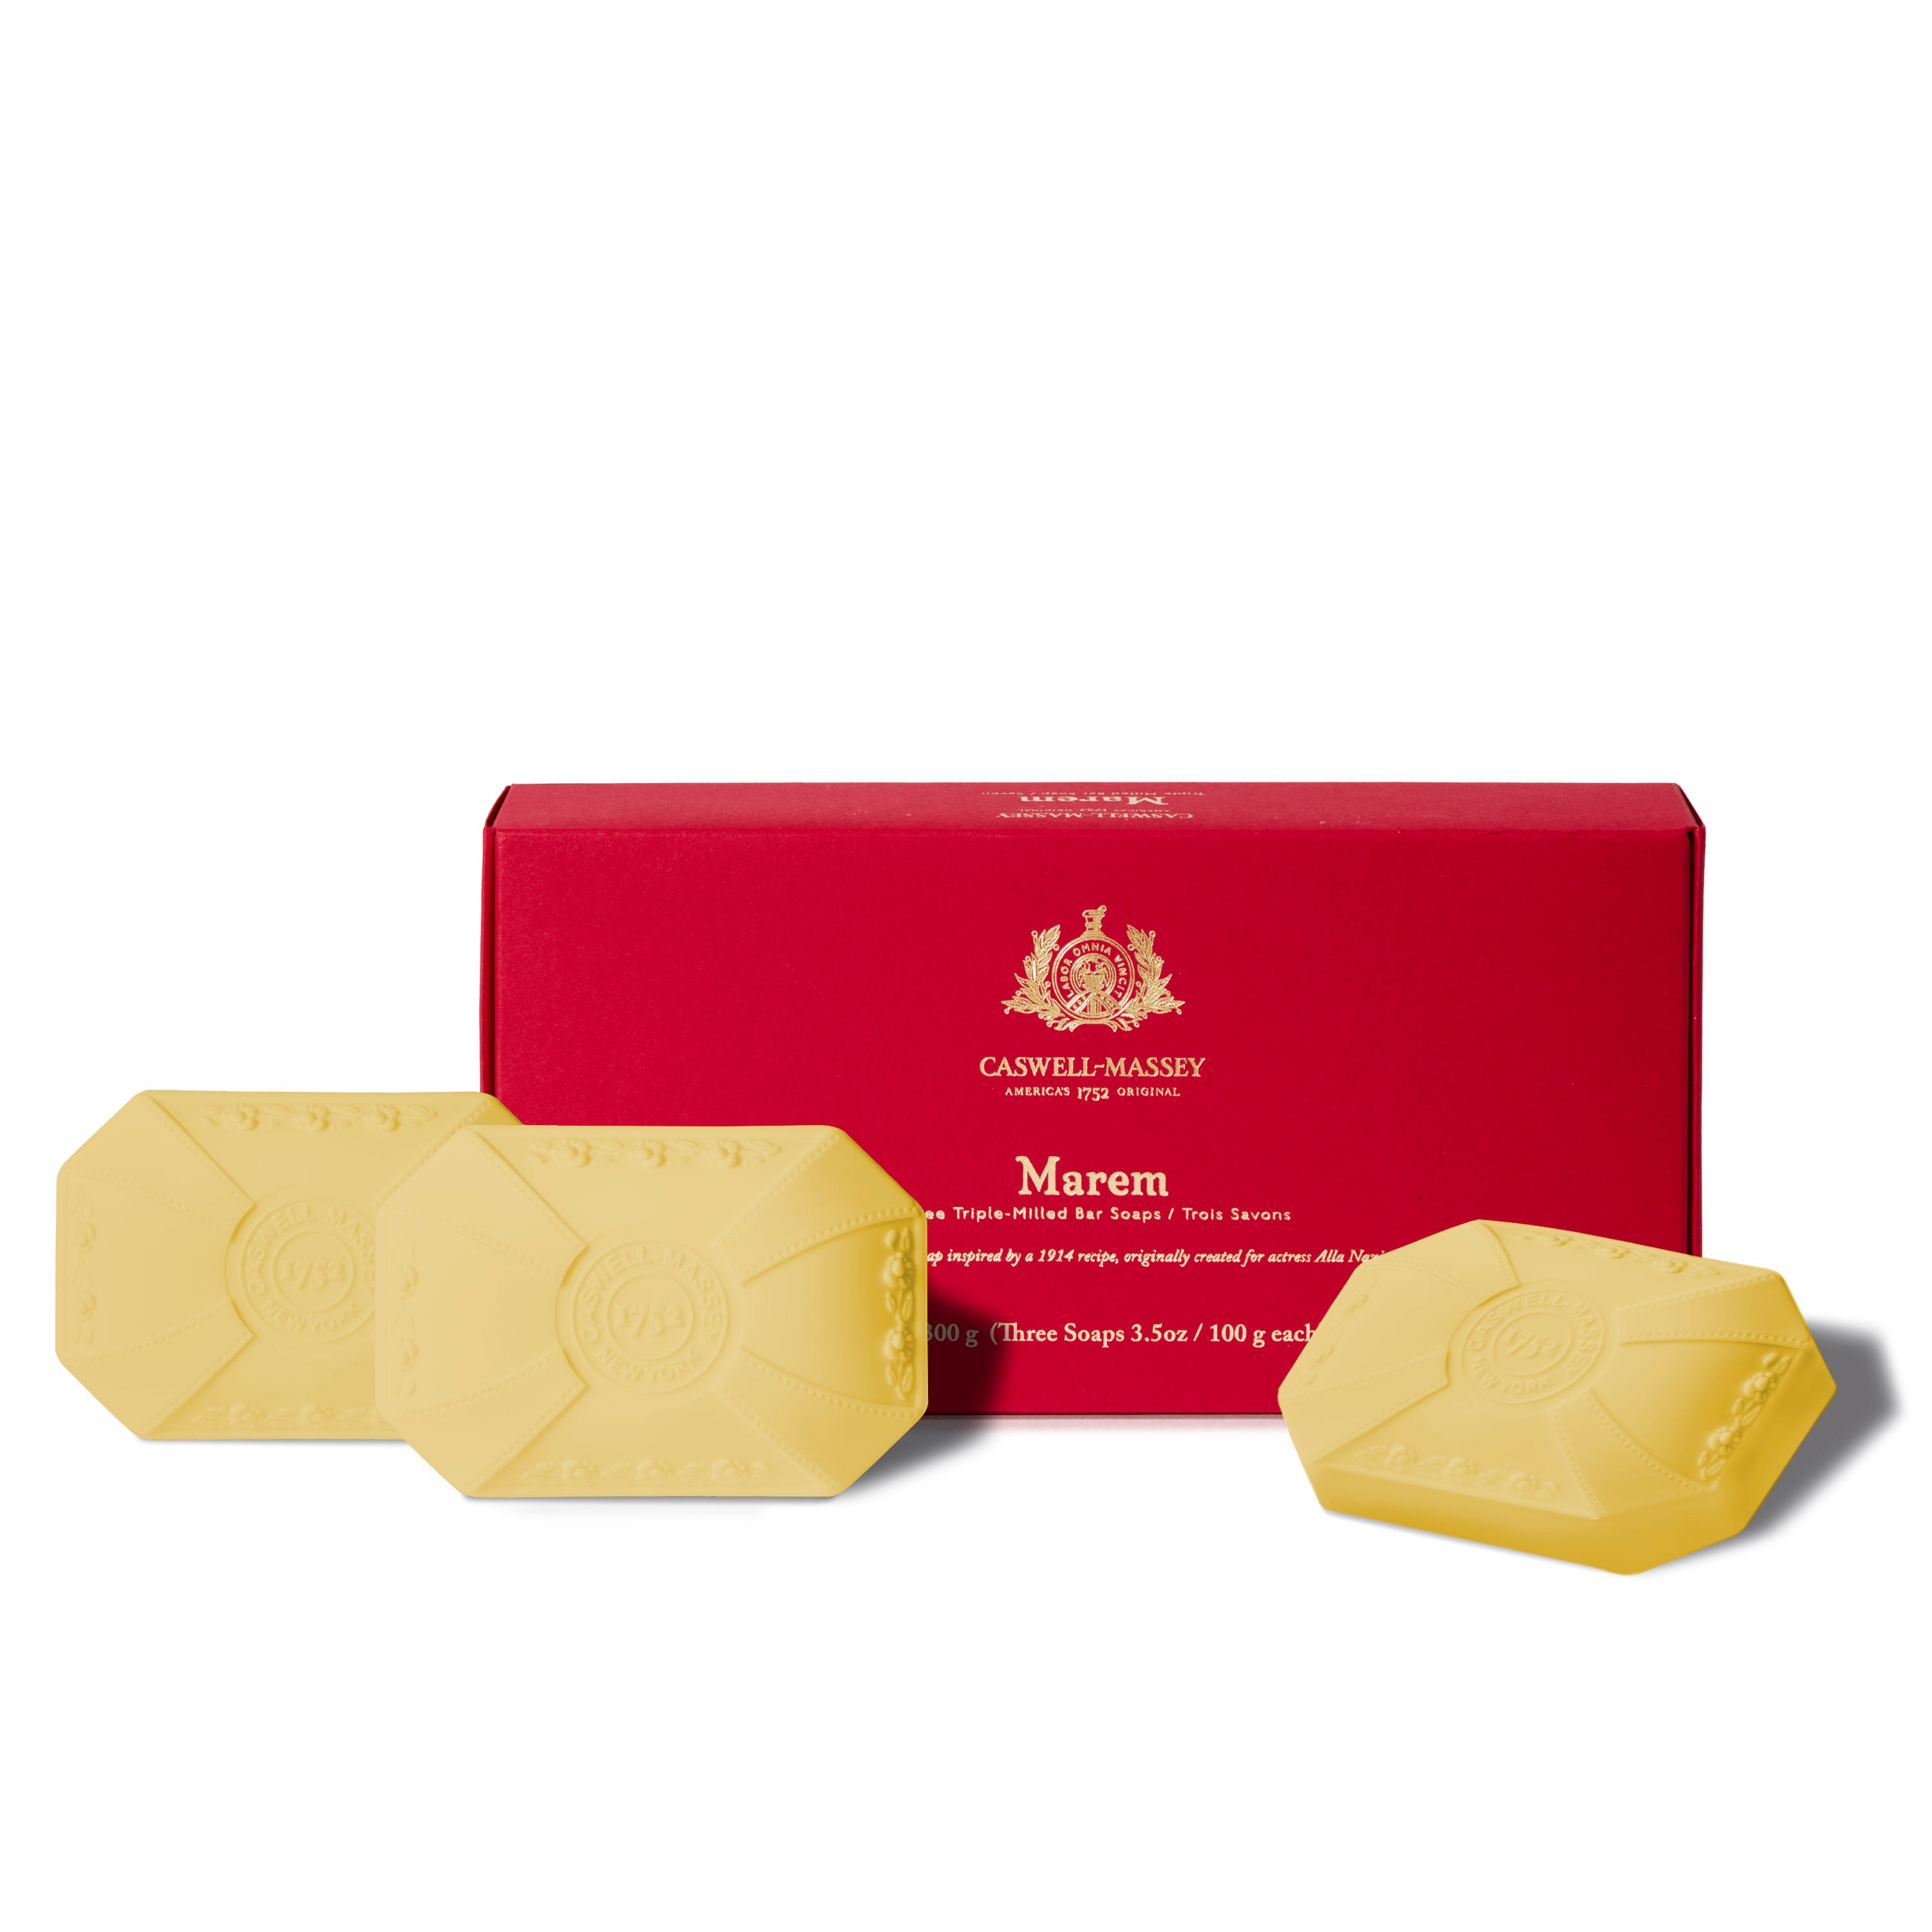 Caswell-Massey Marem Luxury 3-Soap Gift Set shown with gift box alongside natural cream decorative soaps